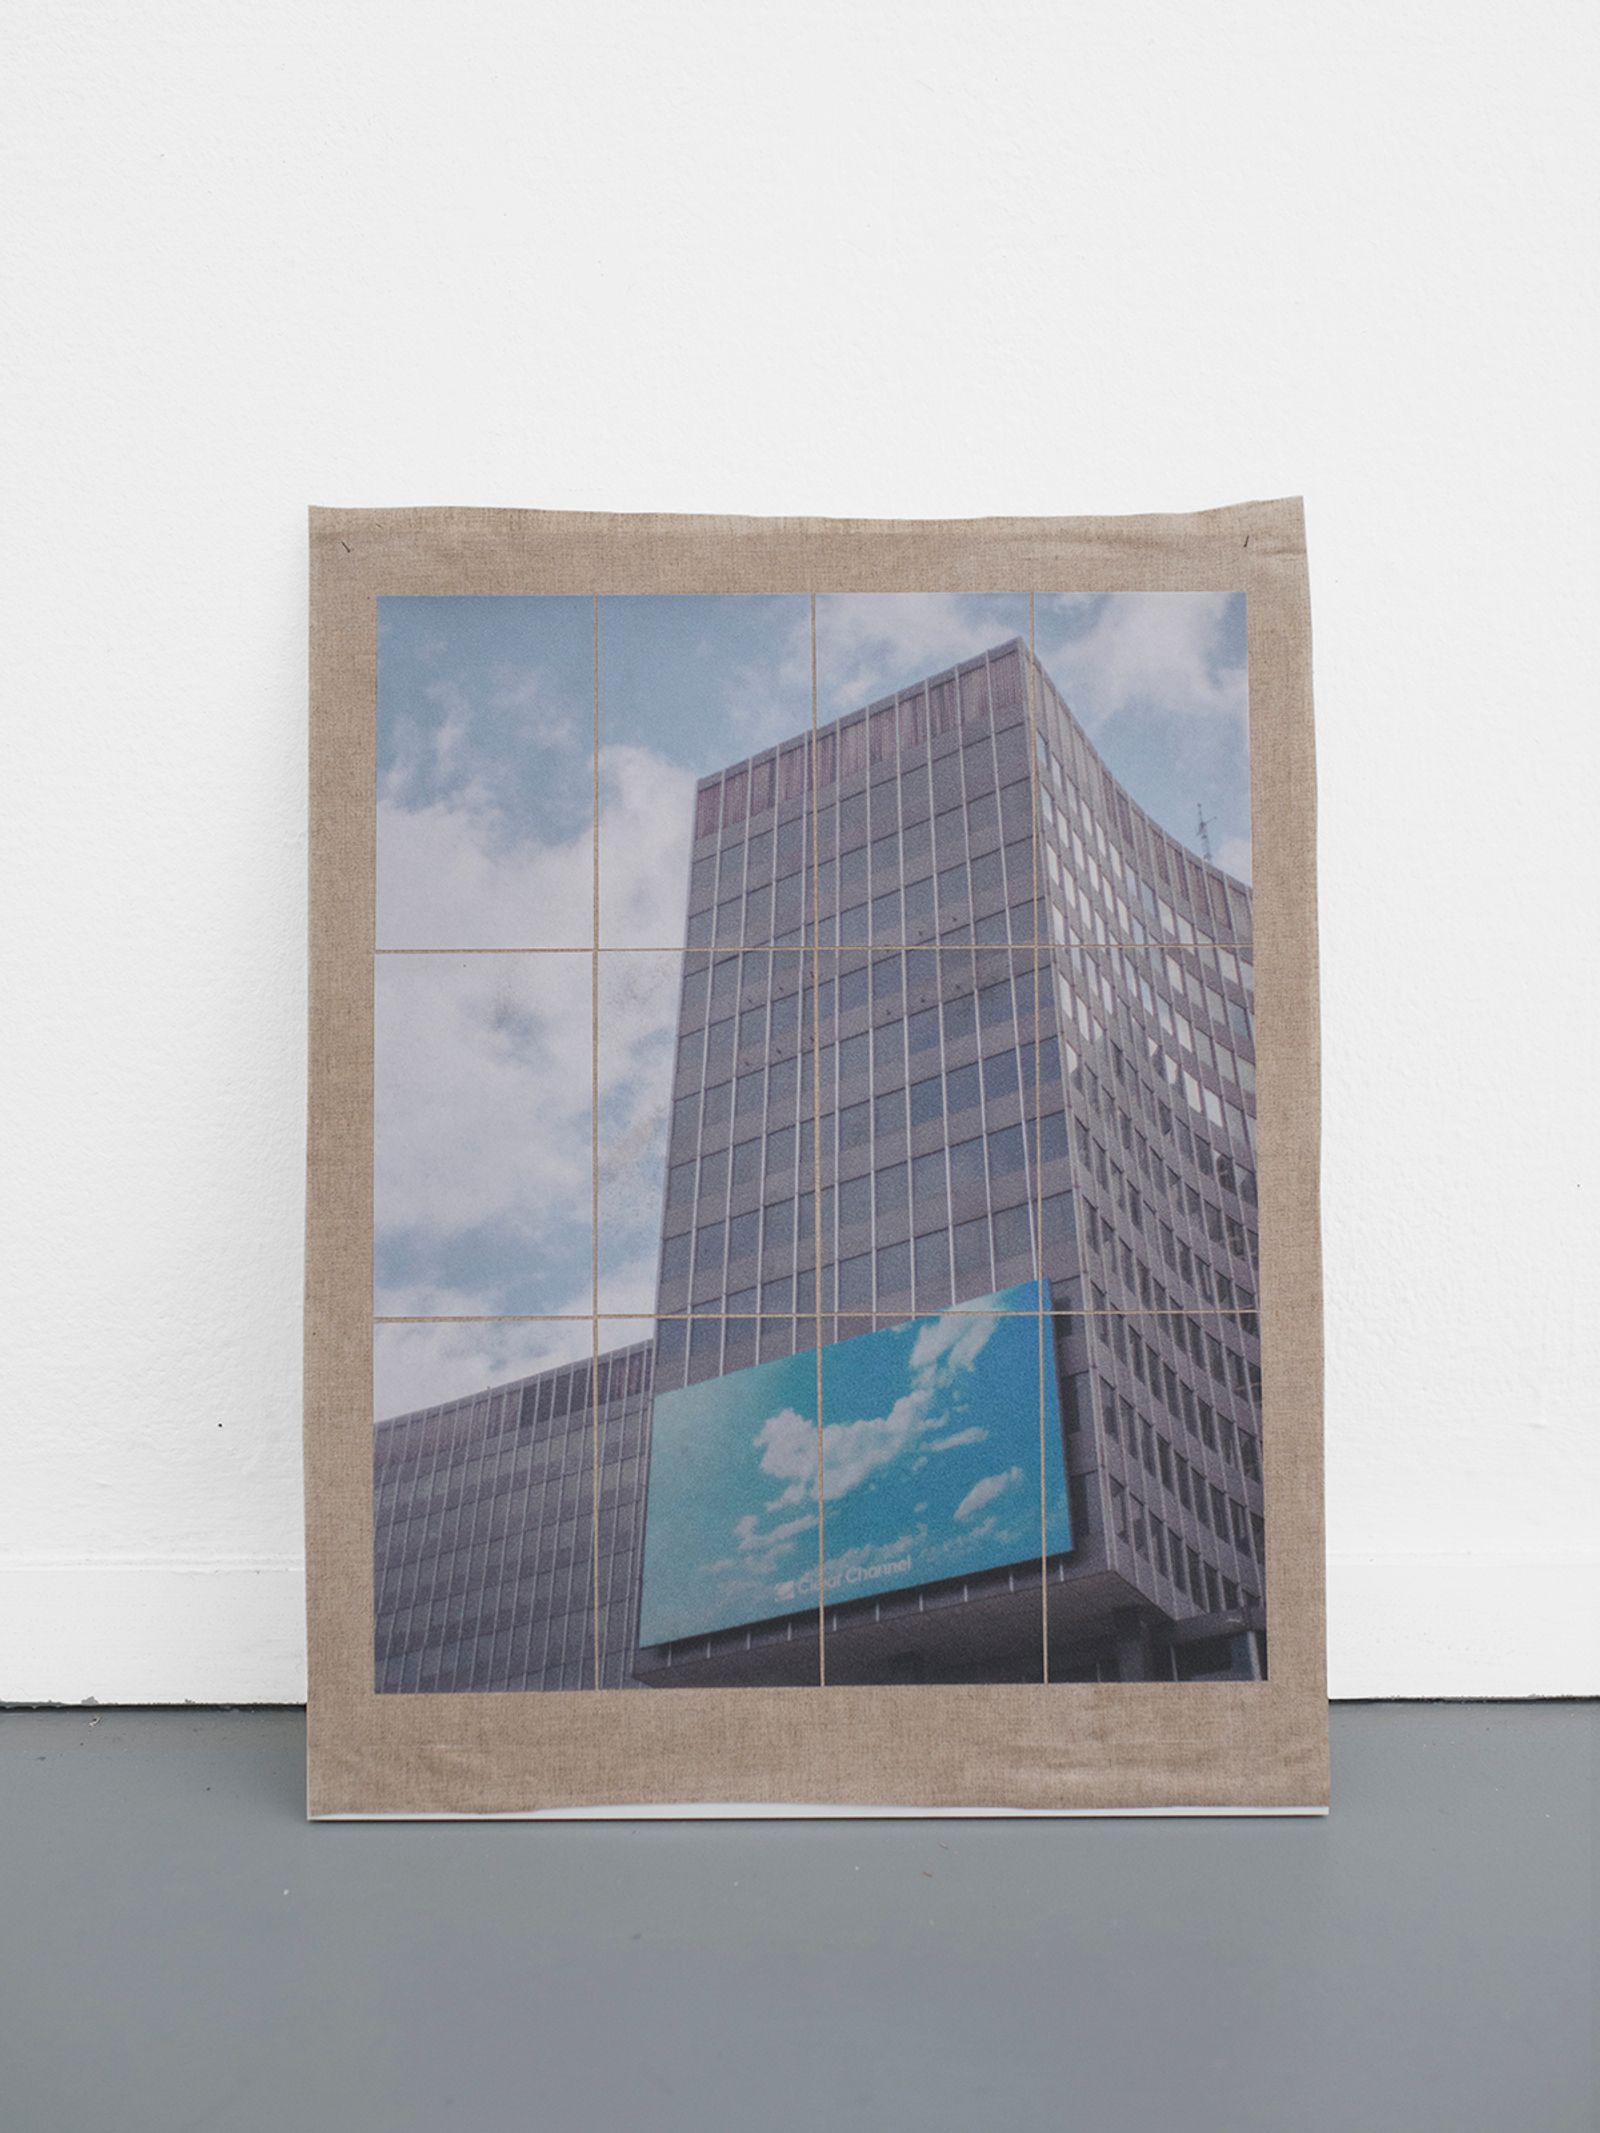 © Esther Hovers - Structures, Clouds, 2019 58 x 46 cm / 22.8 x 18.1 in. Inkjet prints on Tosa Shi – 54 gsm, fixed on linen.